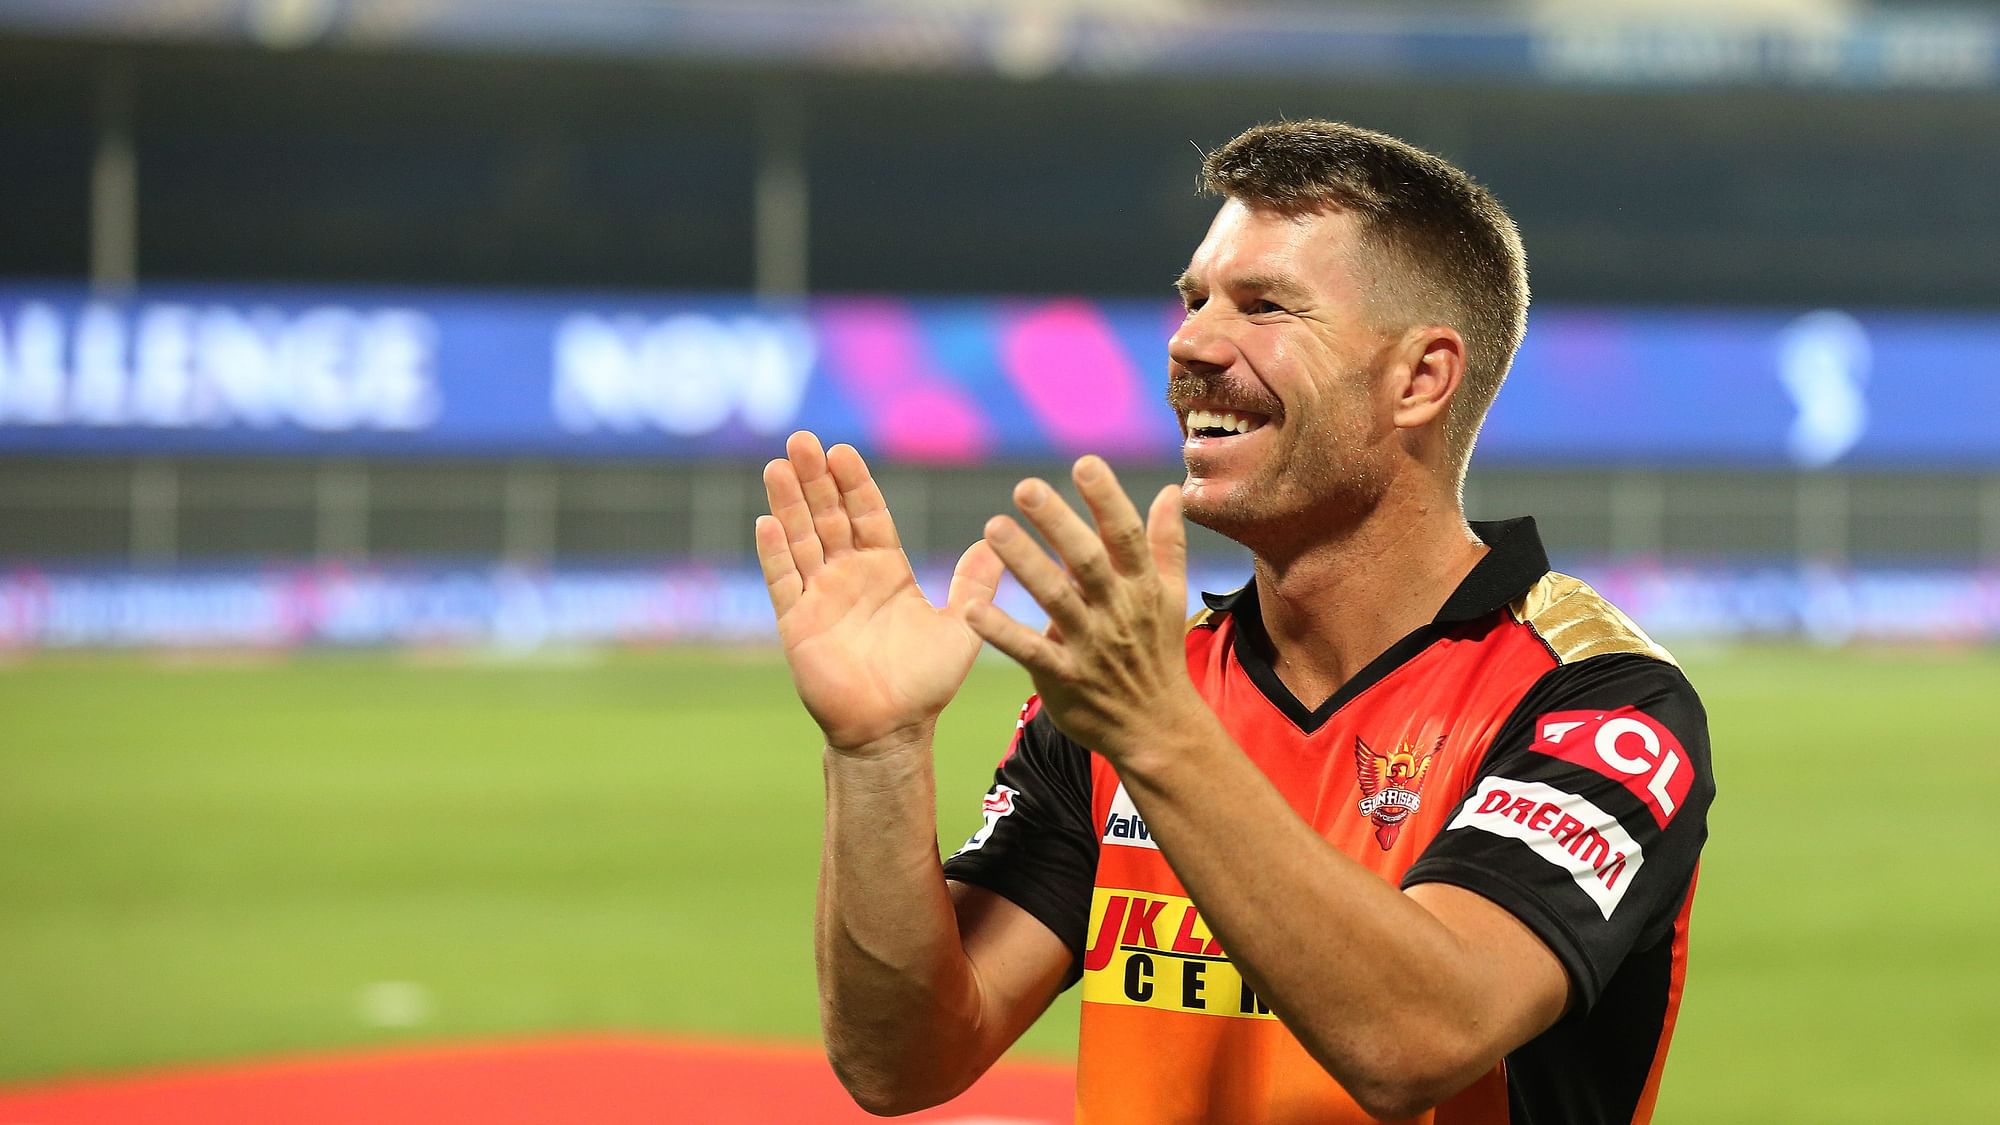 After beating RCB, David Warner said all credit should go to SRH’s bowlers.